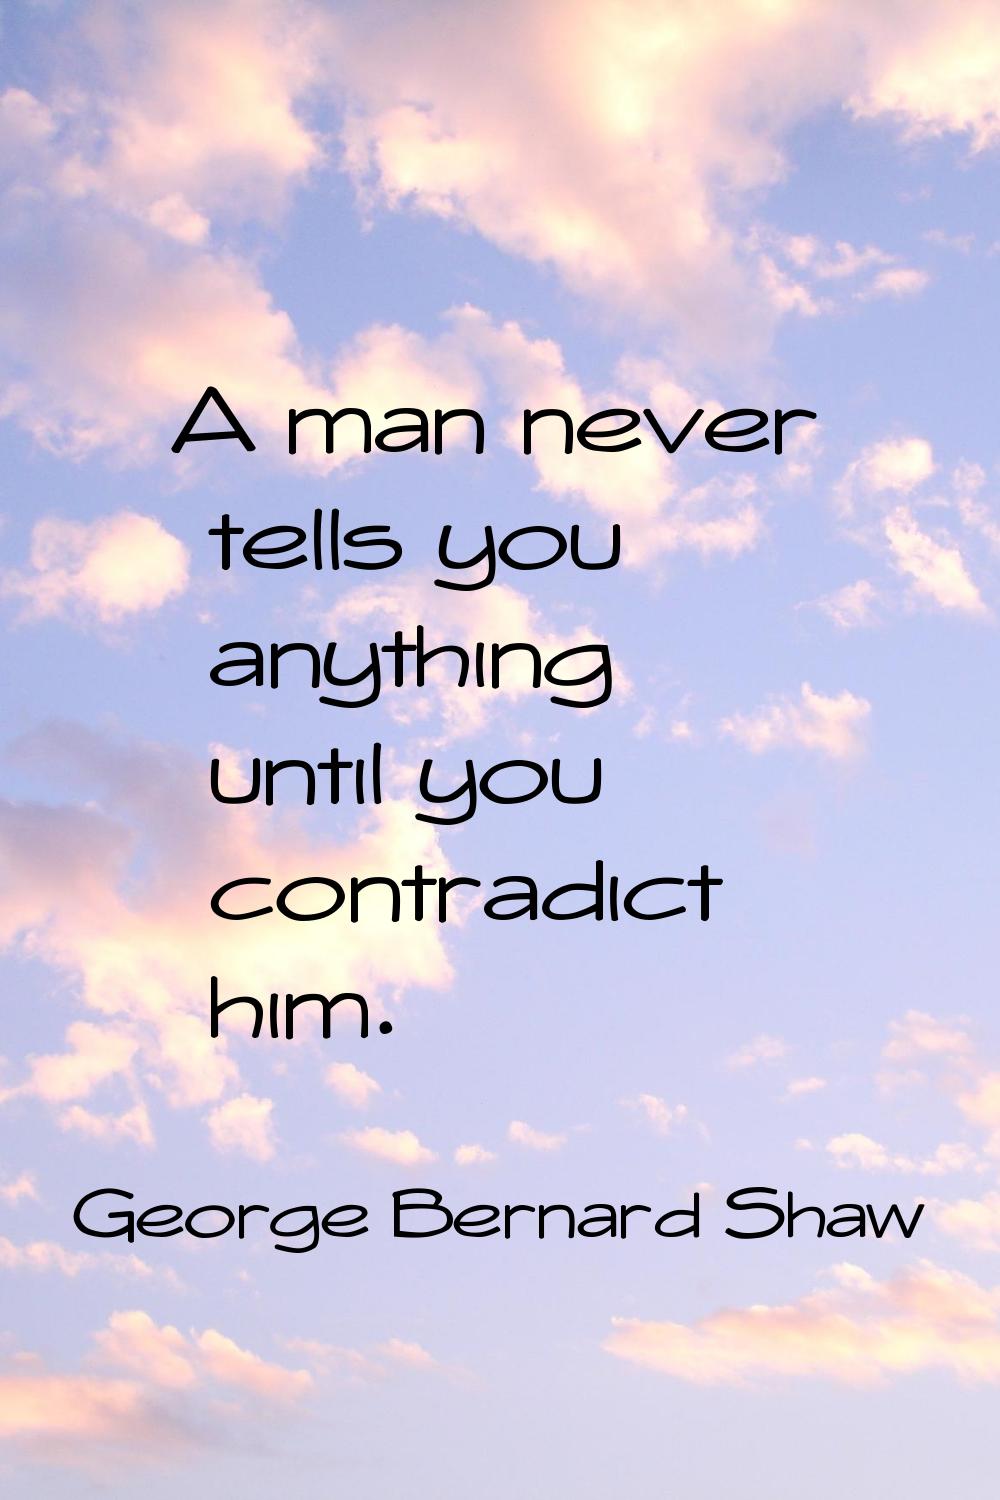 A man never tells you anything until you contradict him.